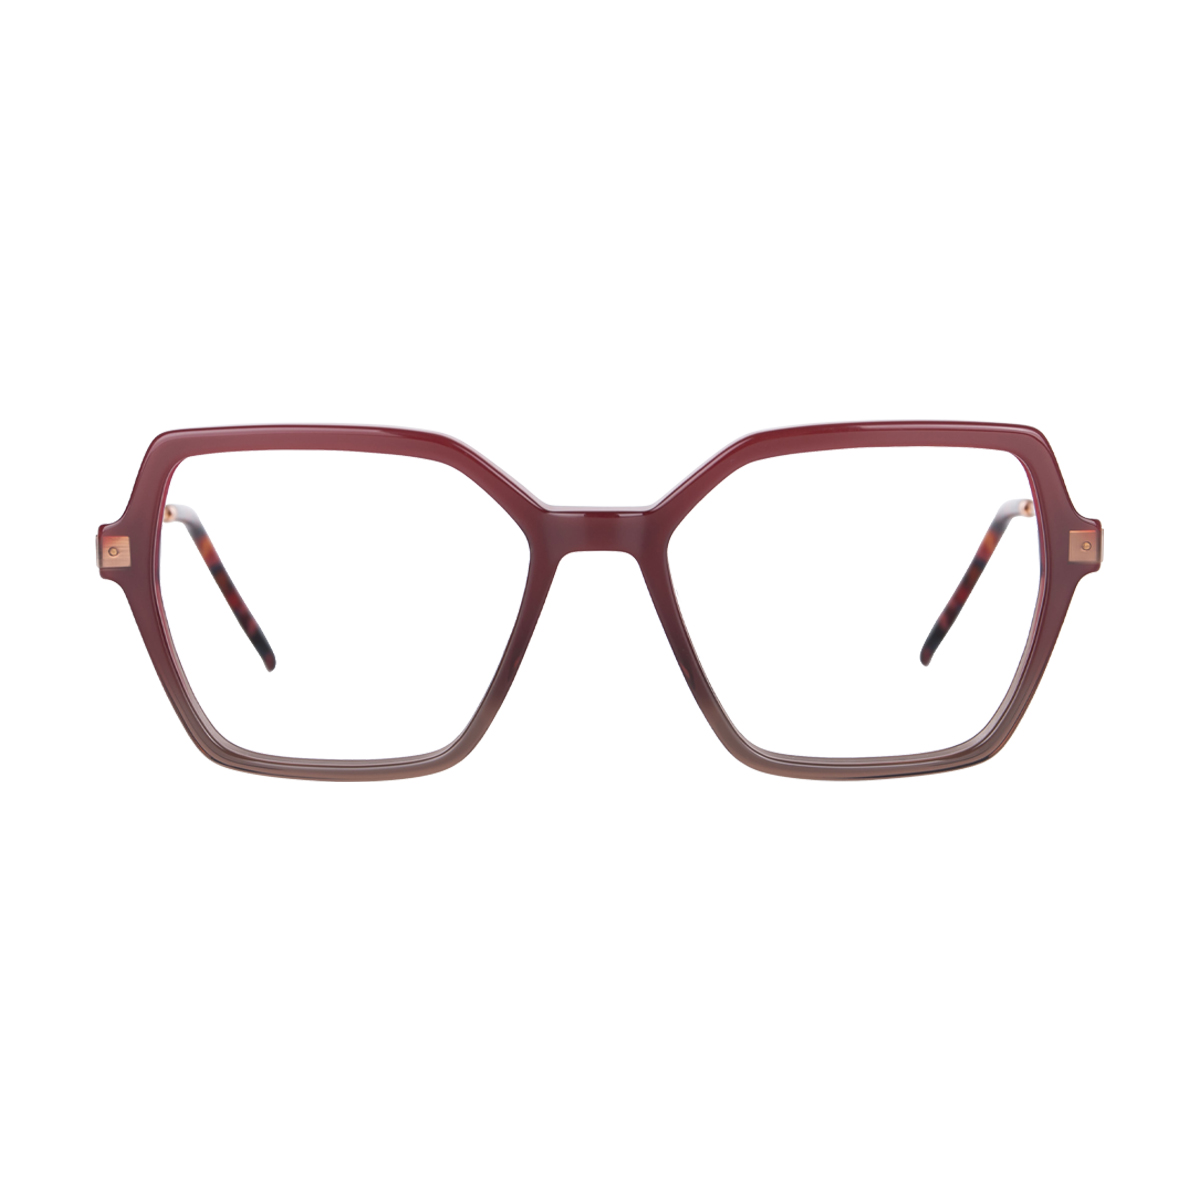 Geometric Glasses - Stylish Frames For All Face Shapes - EFE